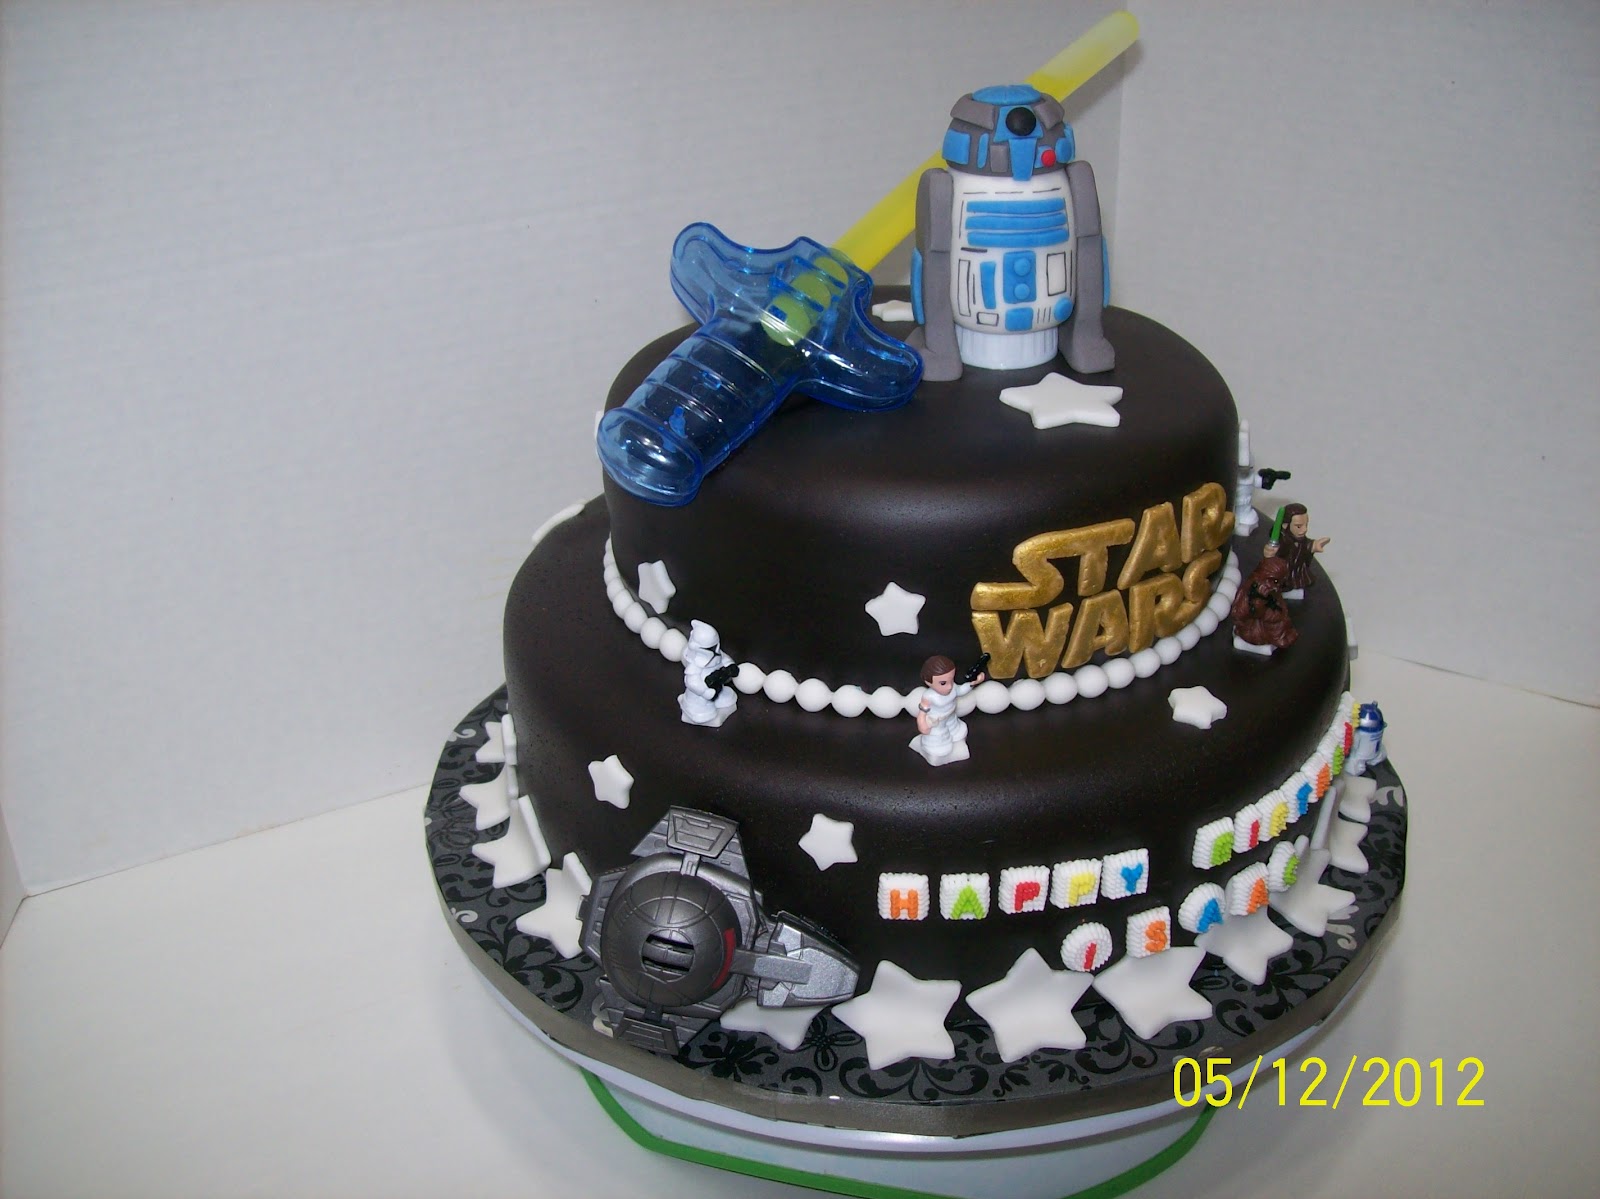 star wars wedding cake Posted by Chris M. Jones at 6:02 PM